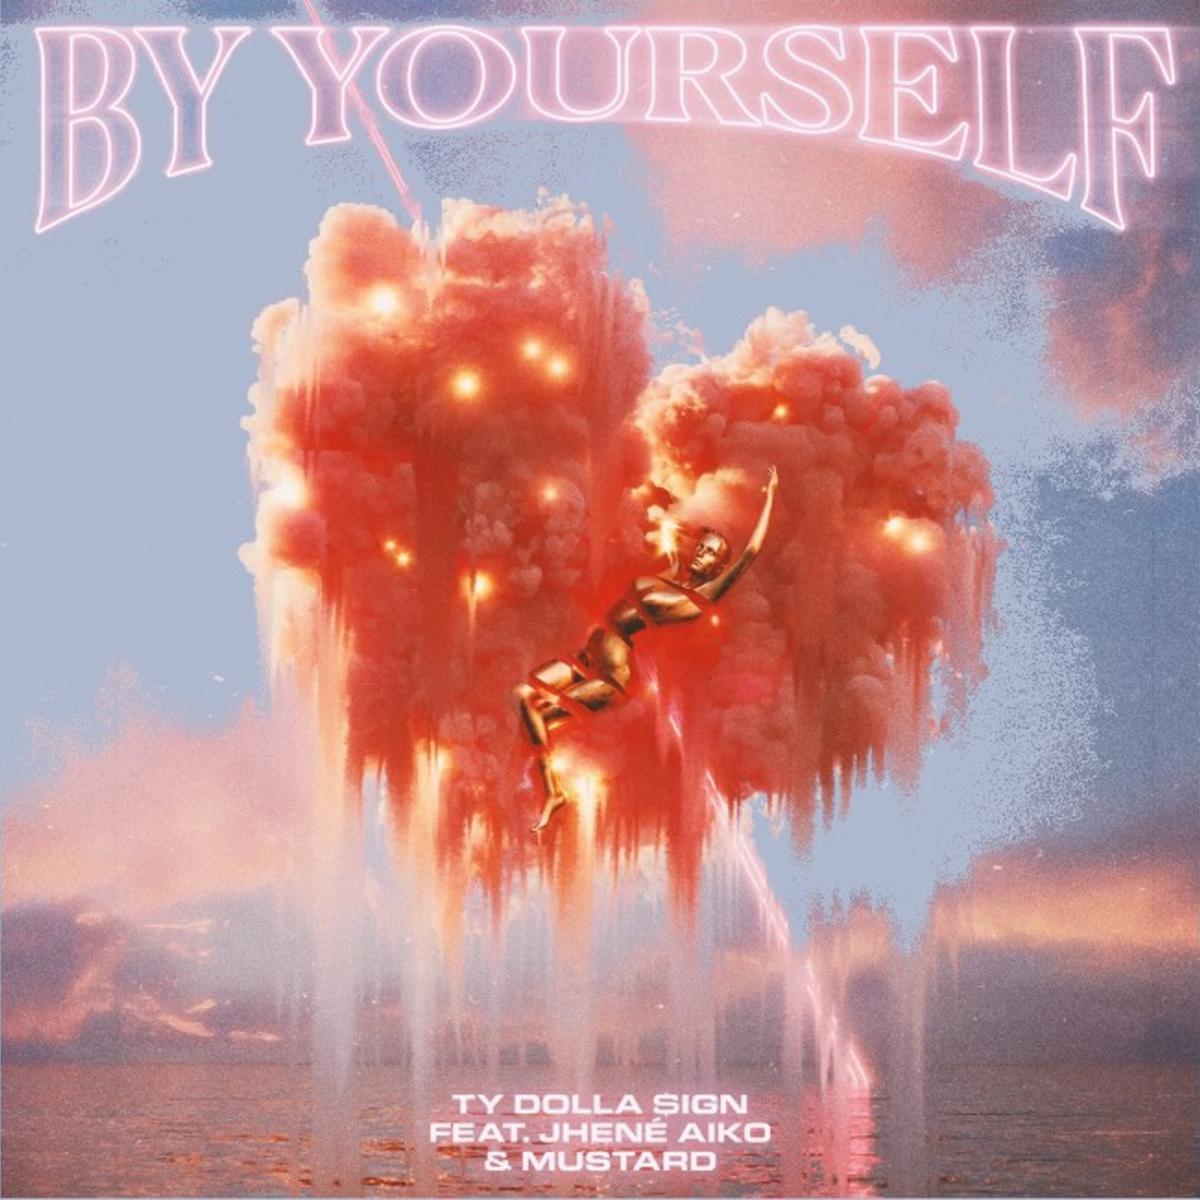 Ty Dolla $ign, Jhene Aiko & Mustard Unite For “By Yourself”